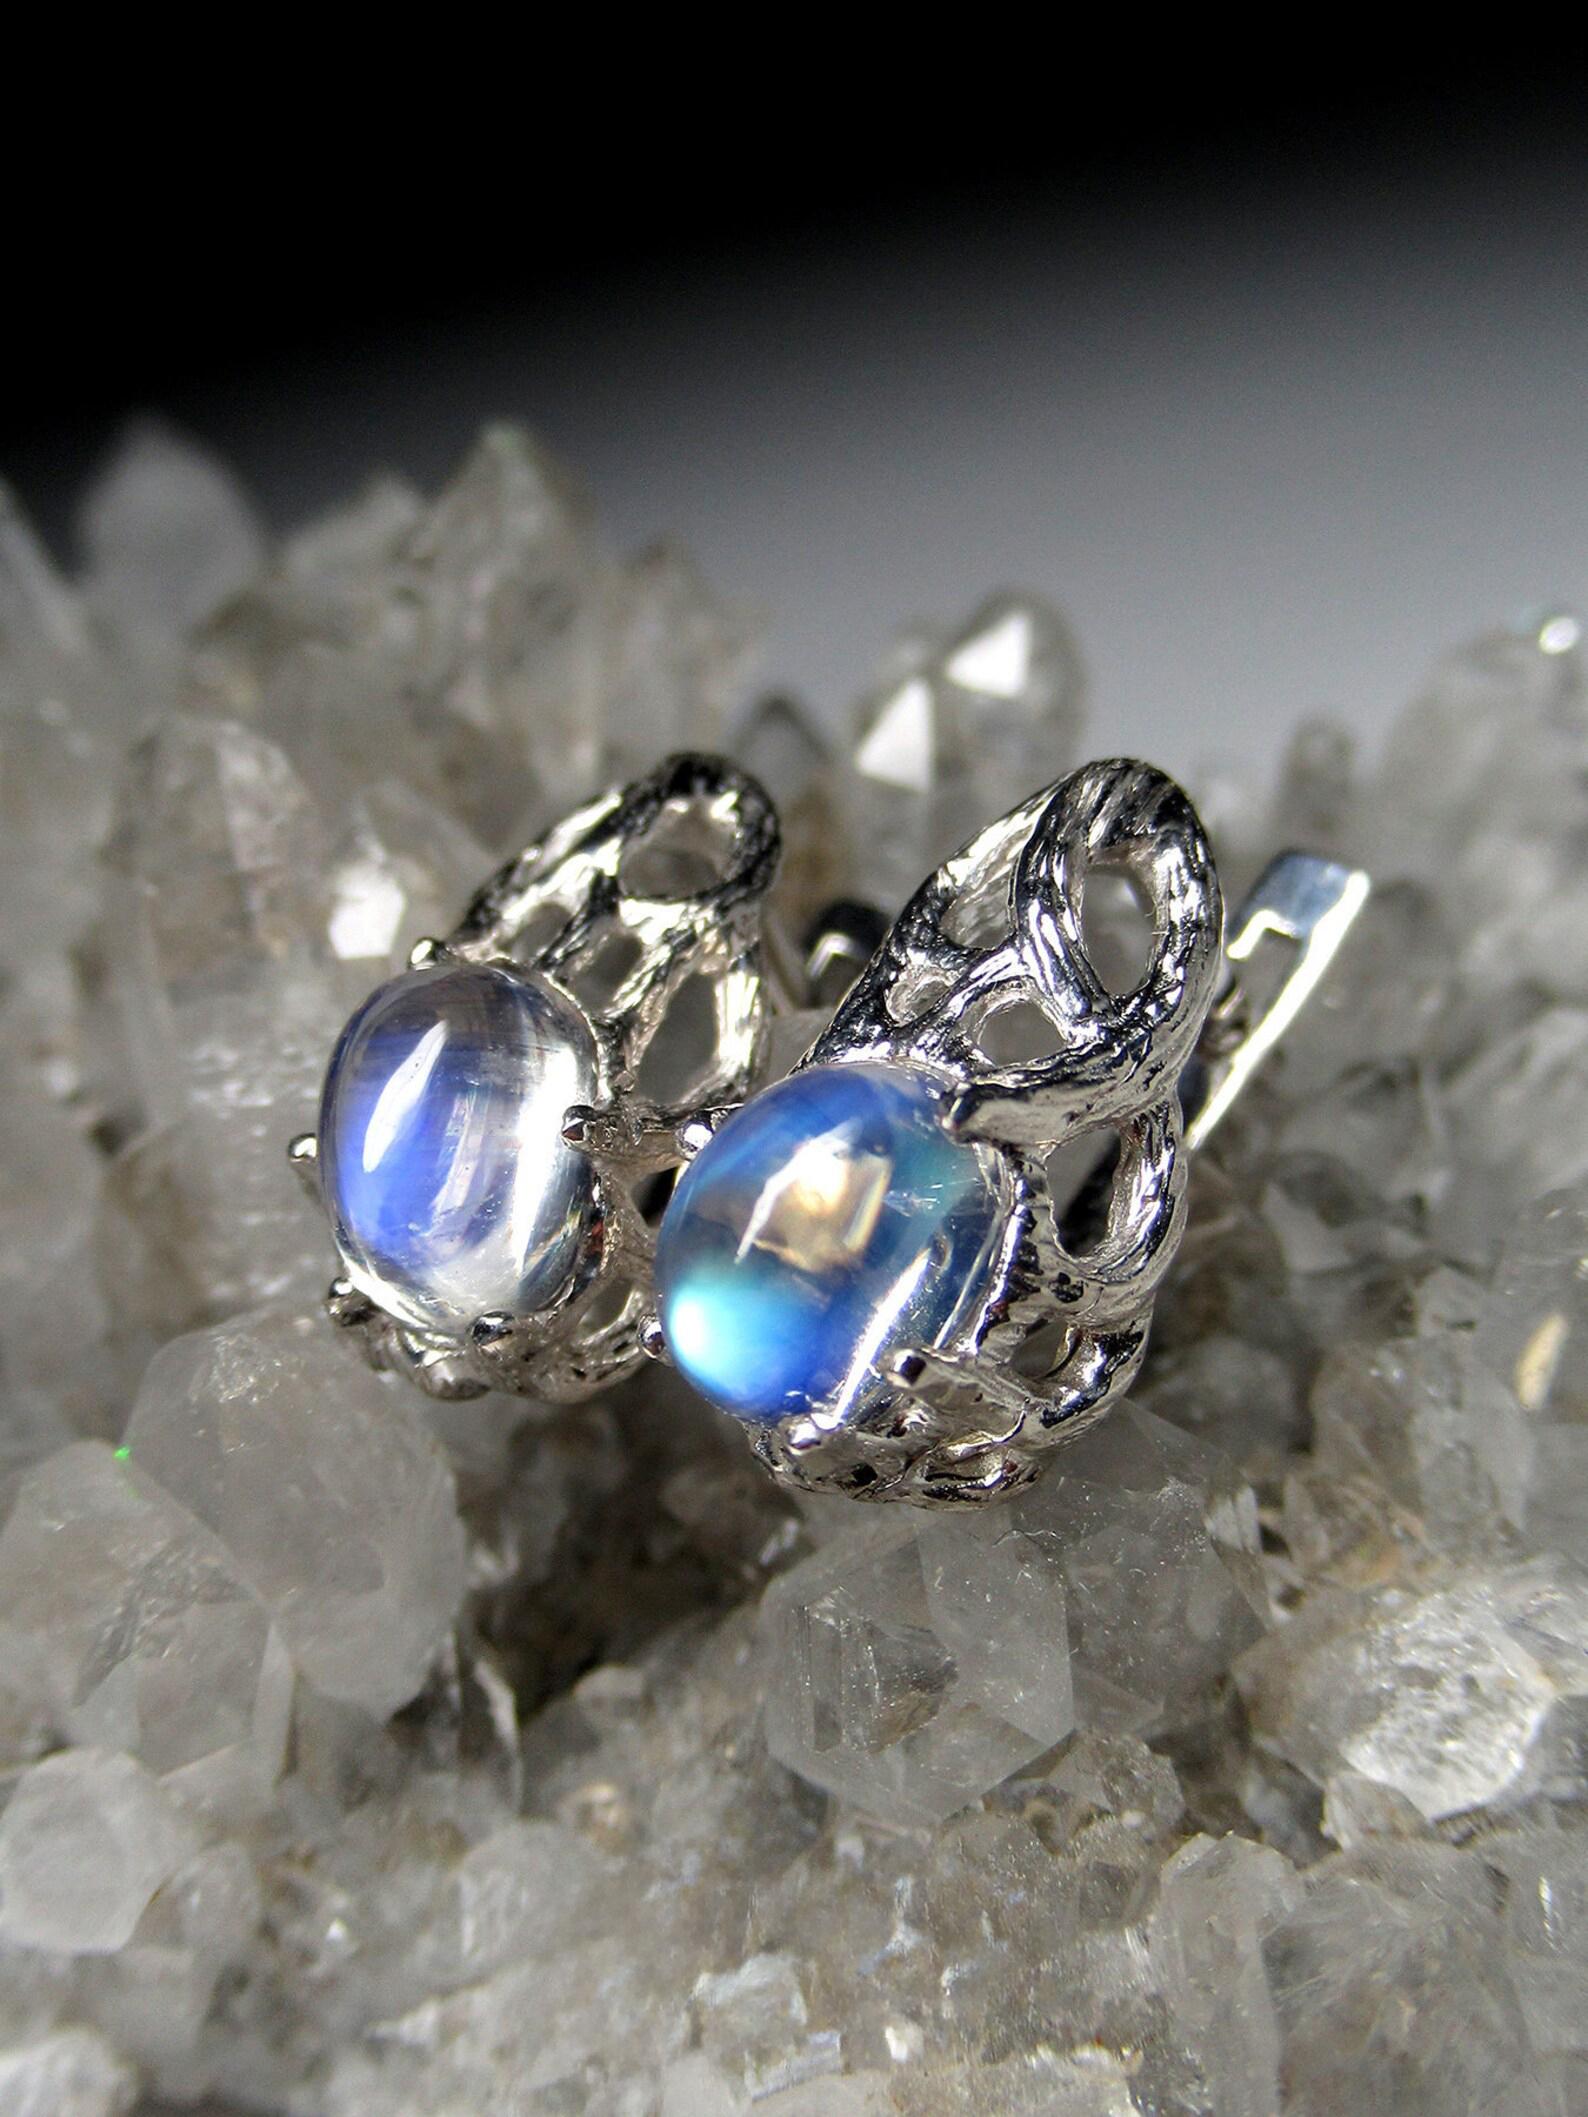 Silver earrings with natural fine quality Moonstone 
gemstone origin - India
moonstone measurements - 0.12 x 0.2 x 0.28 in / 3 x 5 x 7 mm
moonstone weight - 1.43 carat
earrings lenght - 0.59 in / 15 mm
earrings weight - 3.48 grams
Gem report is